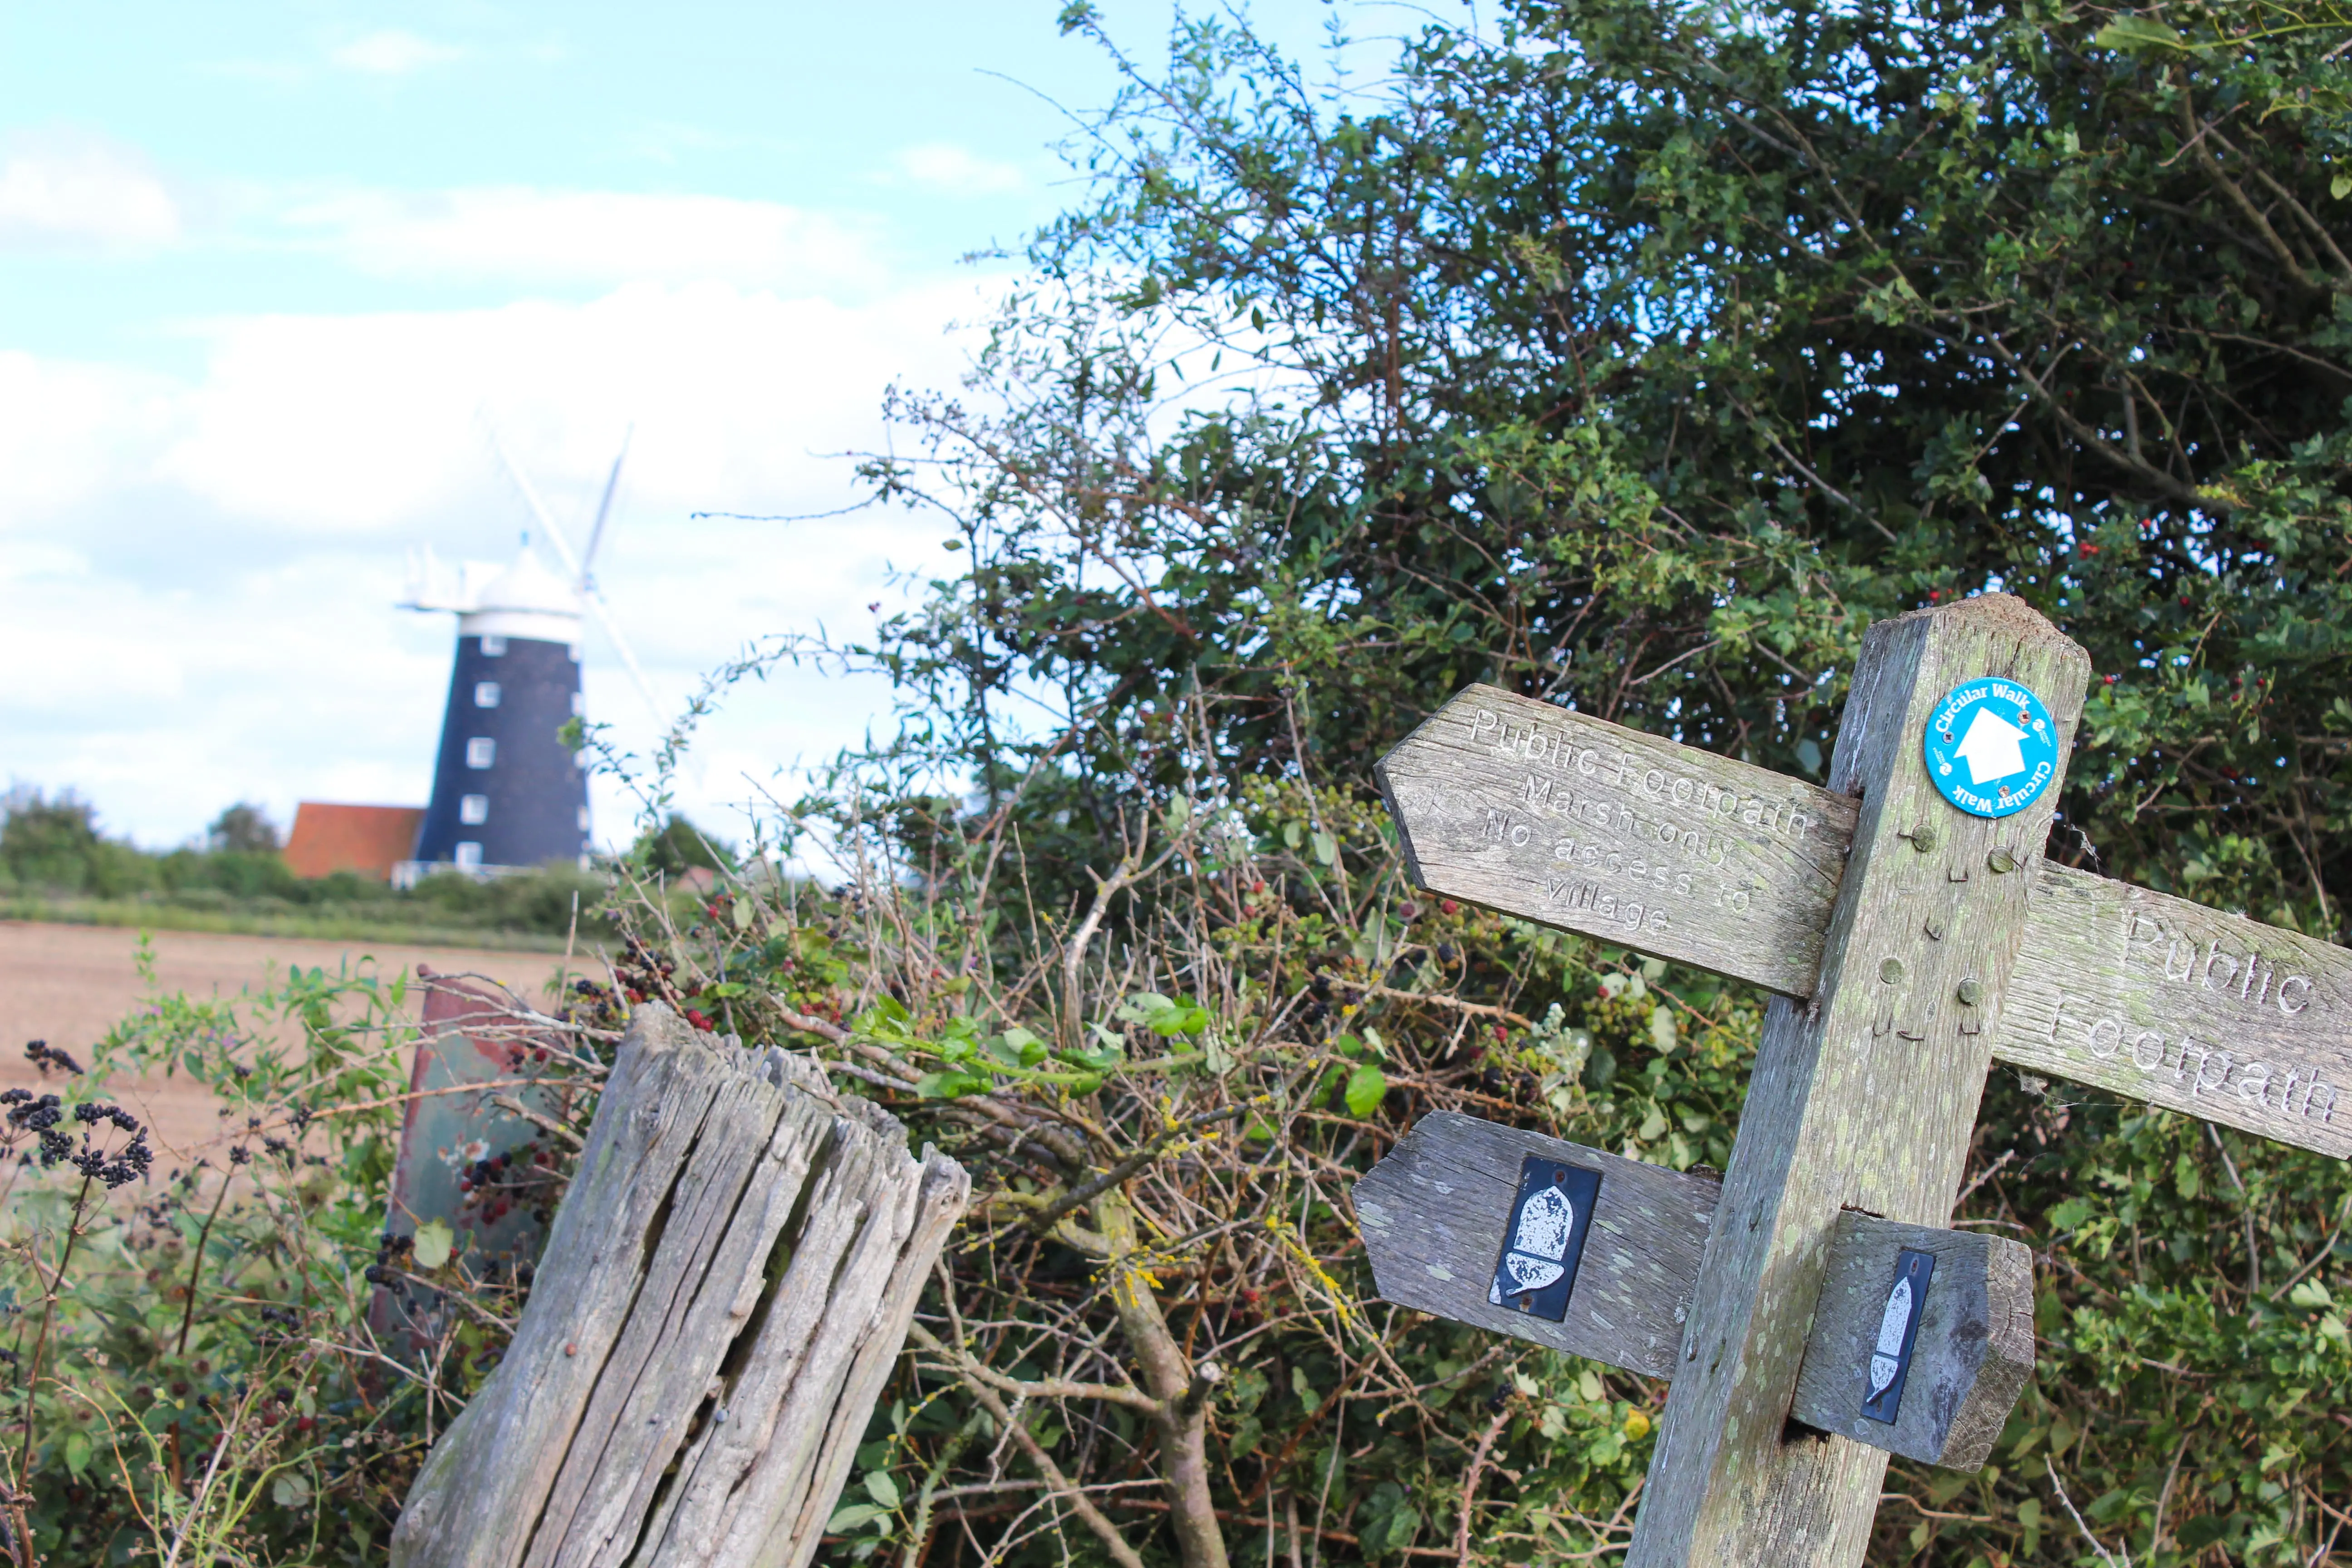 west of wells camping & glamping burnham windmill and walking paths